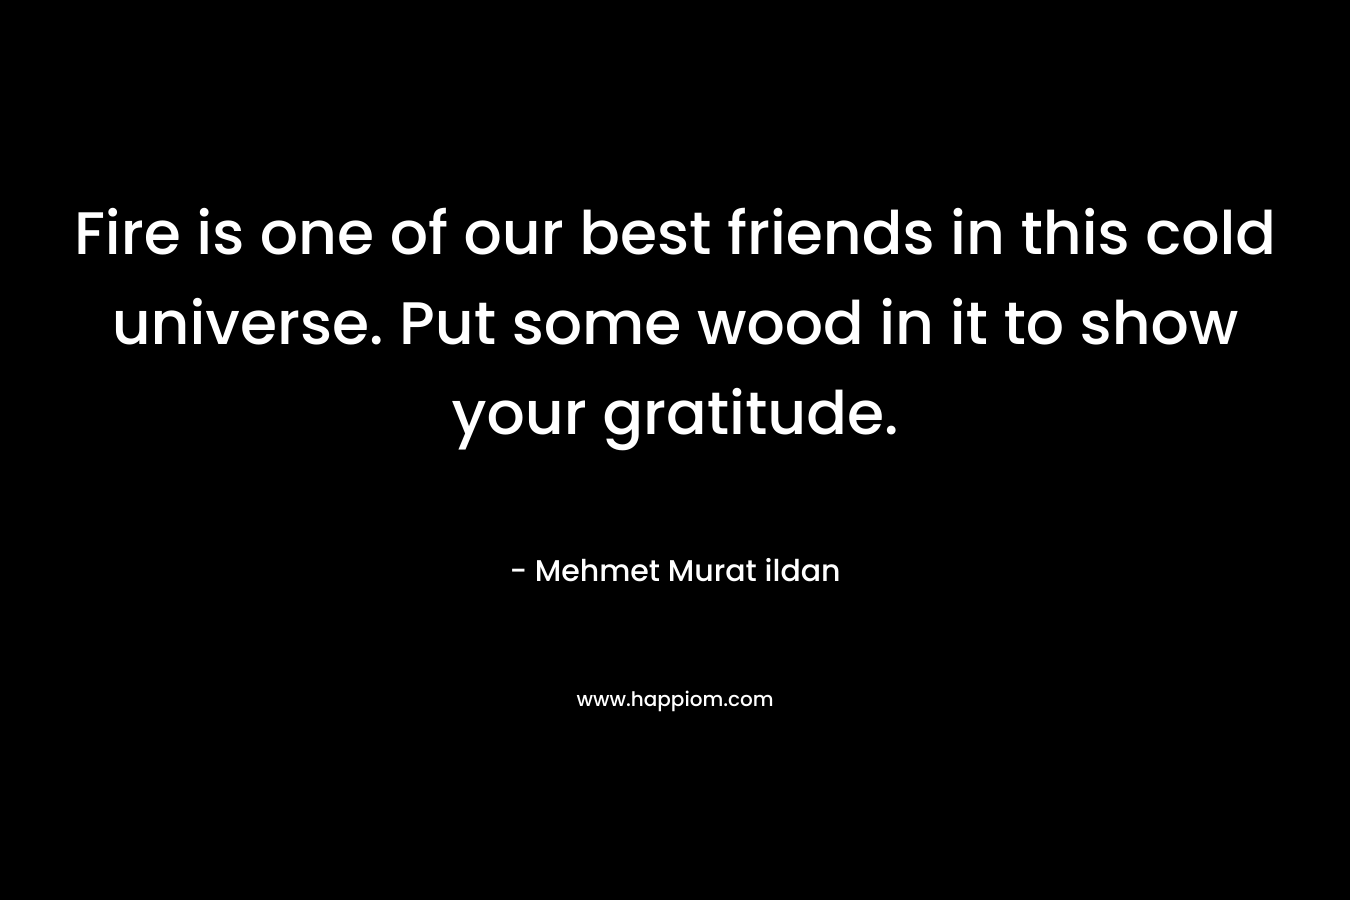 Fire is one of our best friends in this cold universe. Put some wood in it to show your gratitude. – Mehmet Murat ildan